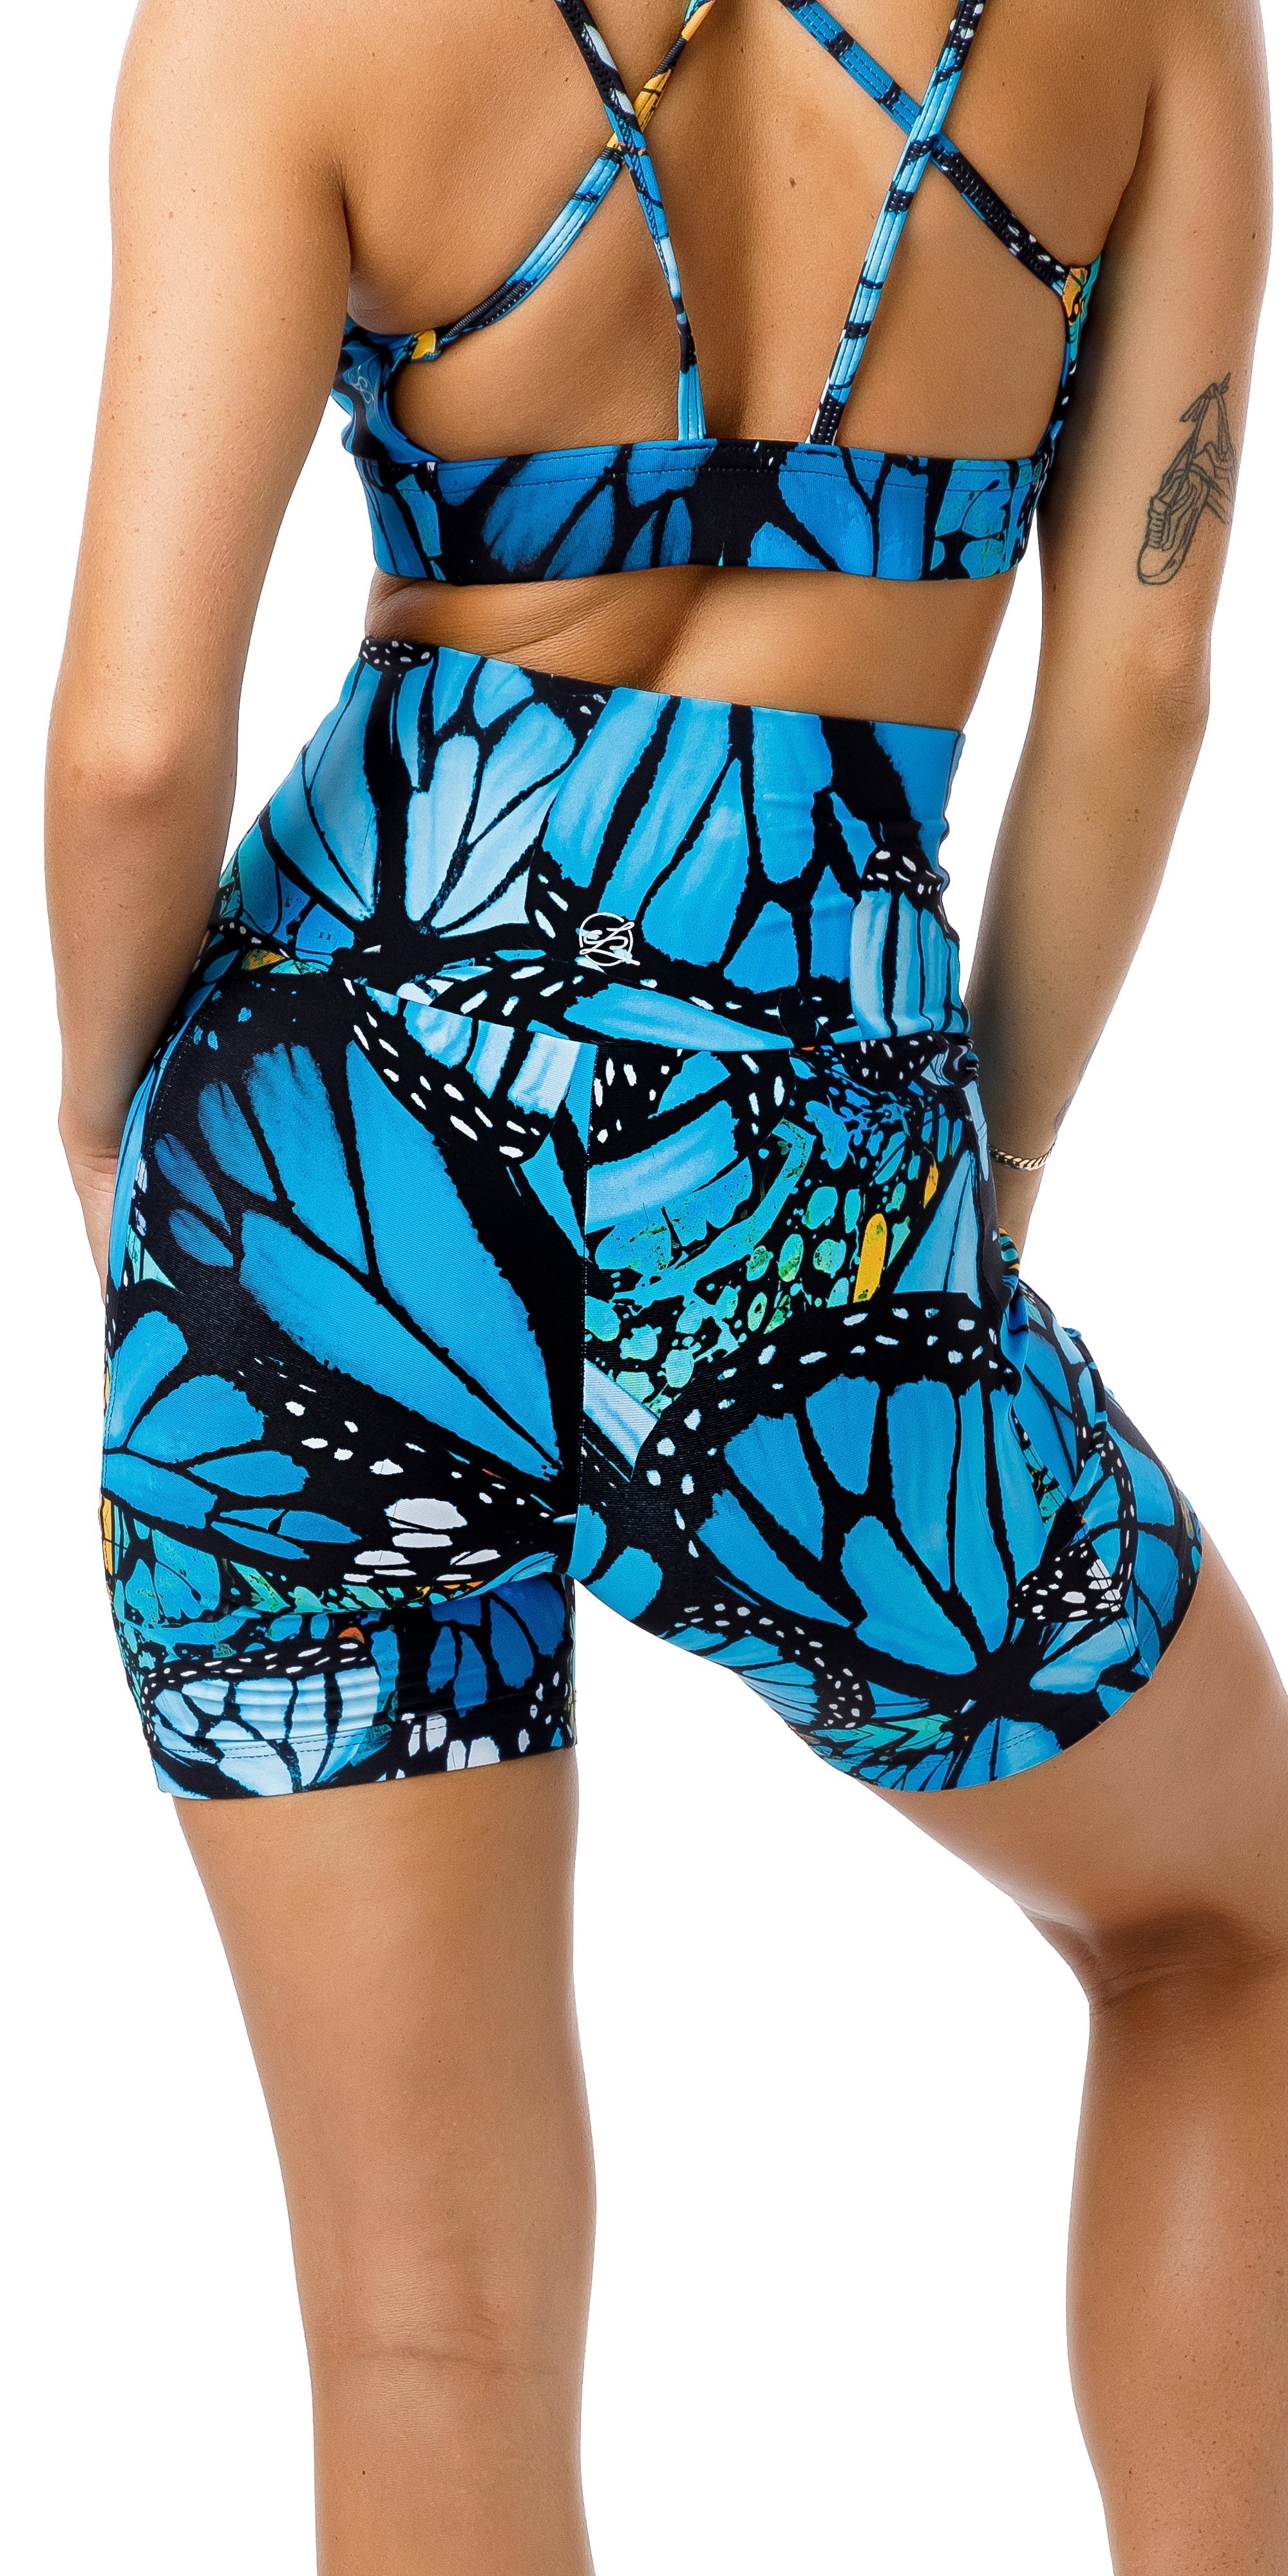 Carra Lee Active shorts Butterfly Midi Shorts with Pockets